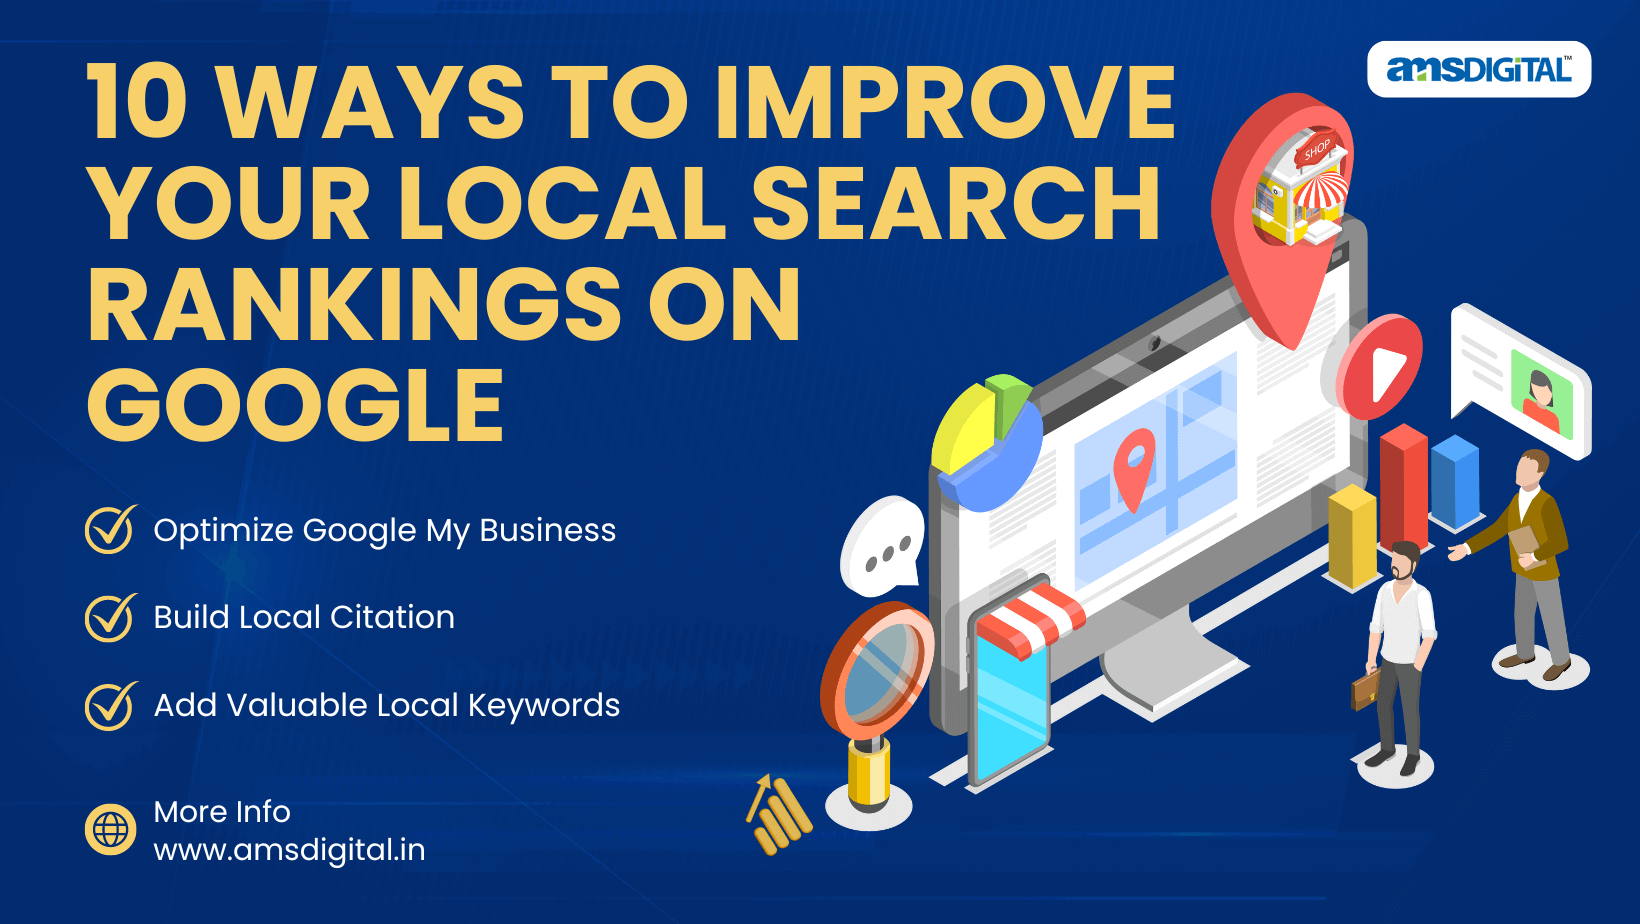 10 Ways to Improve Your Local Search Rankings on Google